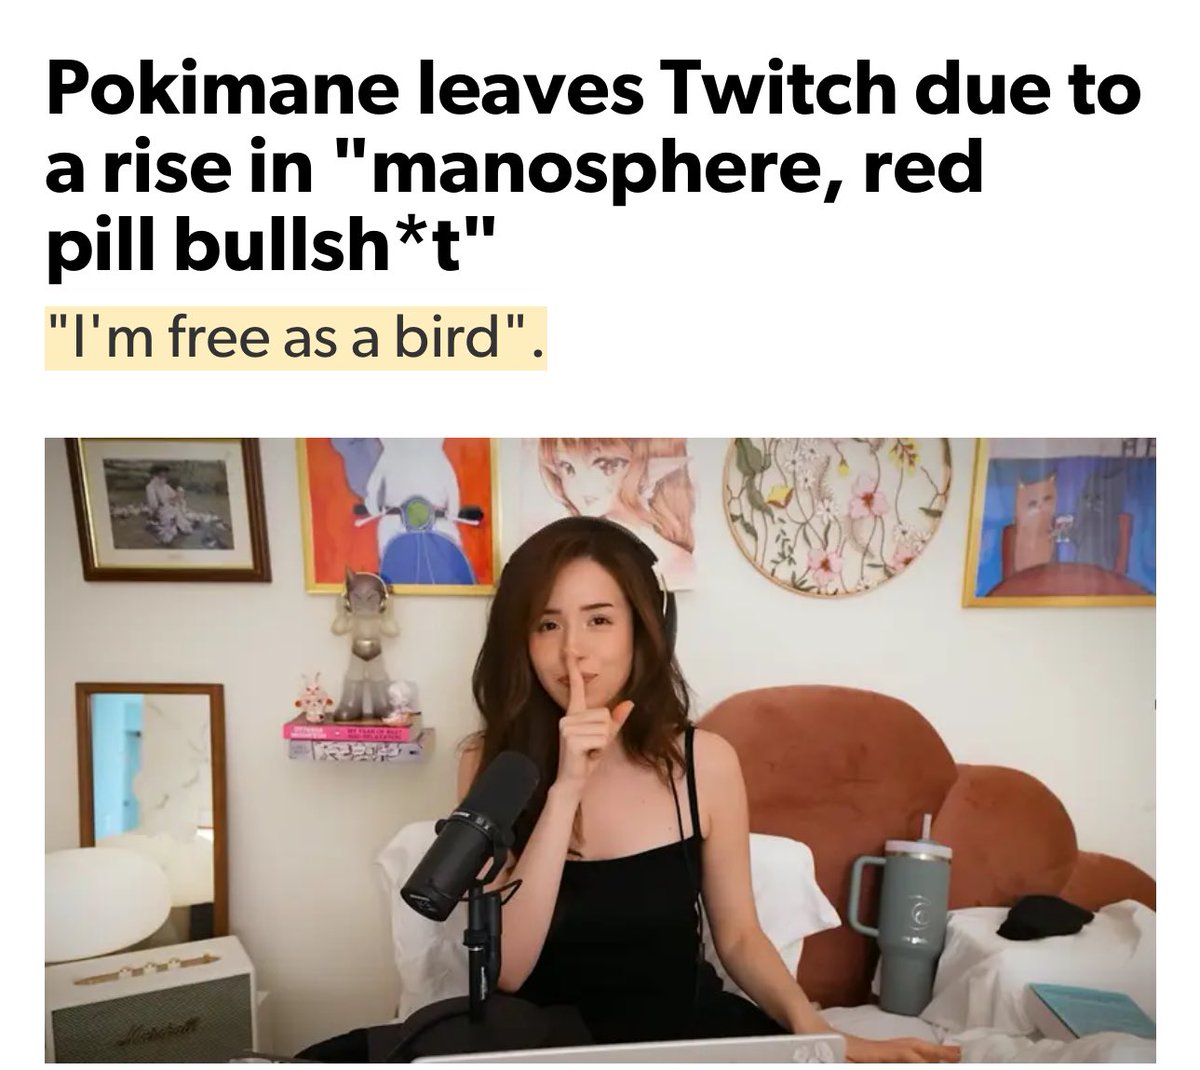 Men are waking up and starting to stop simping for a useless Twitch 304. Good work bros! The tide is finally starting to turn.